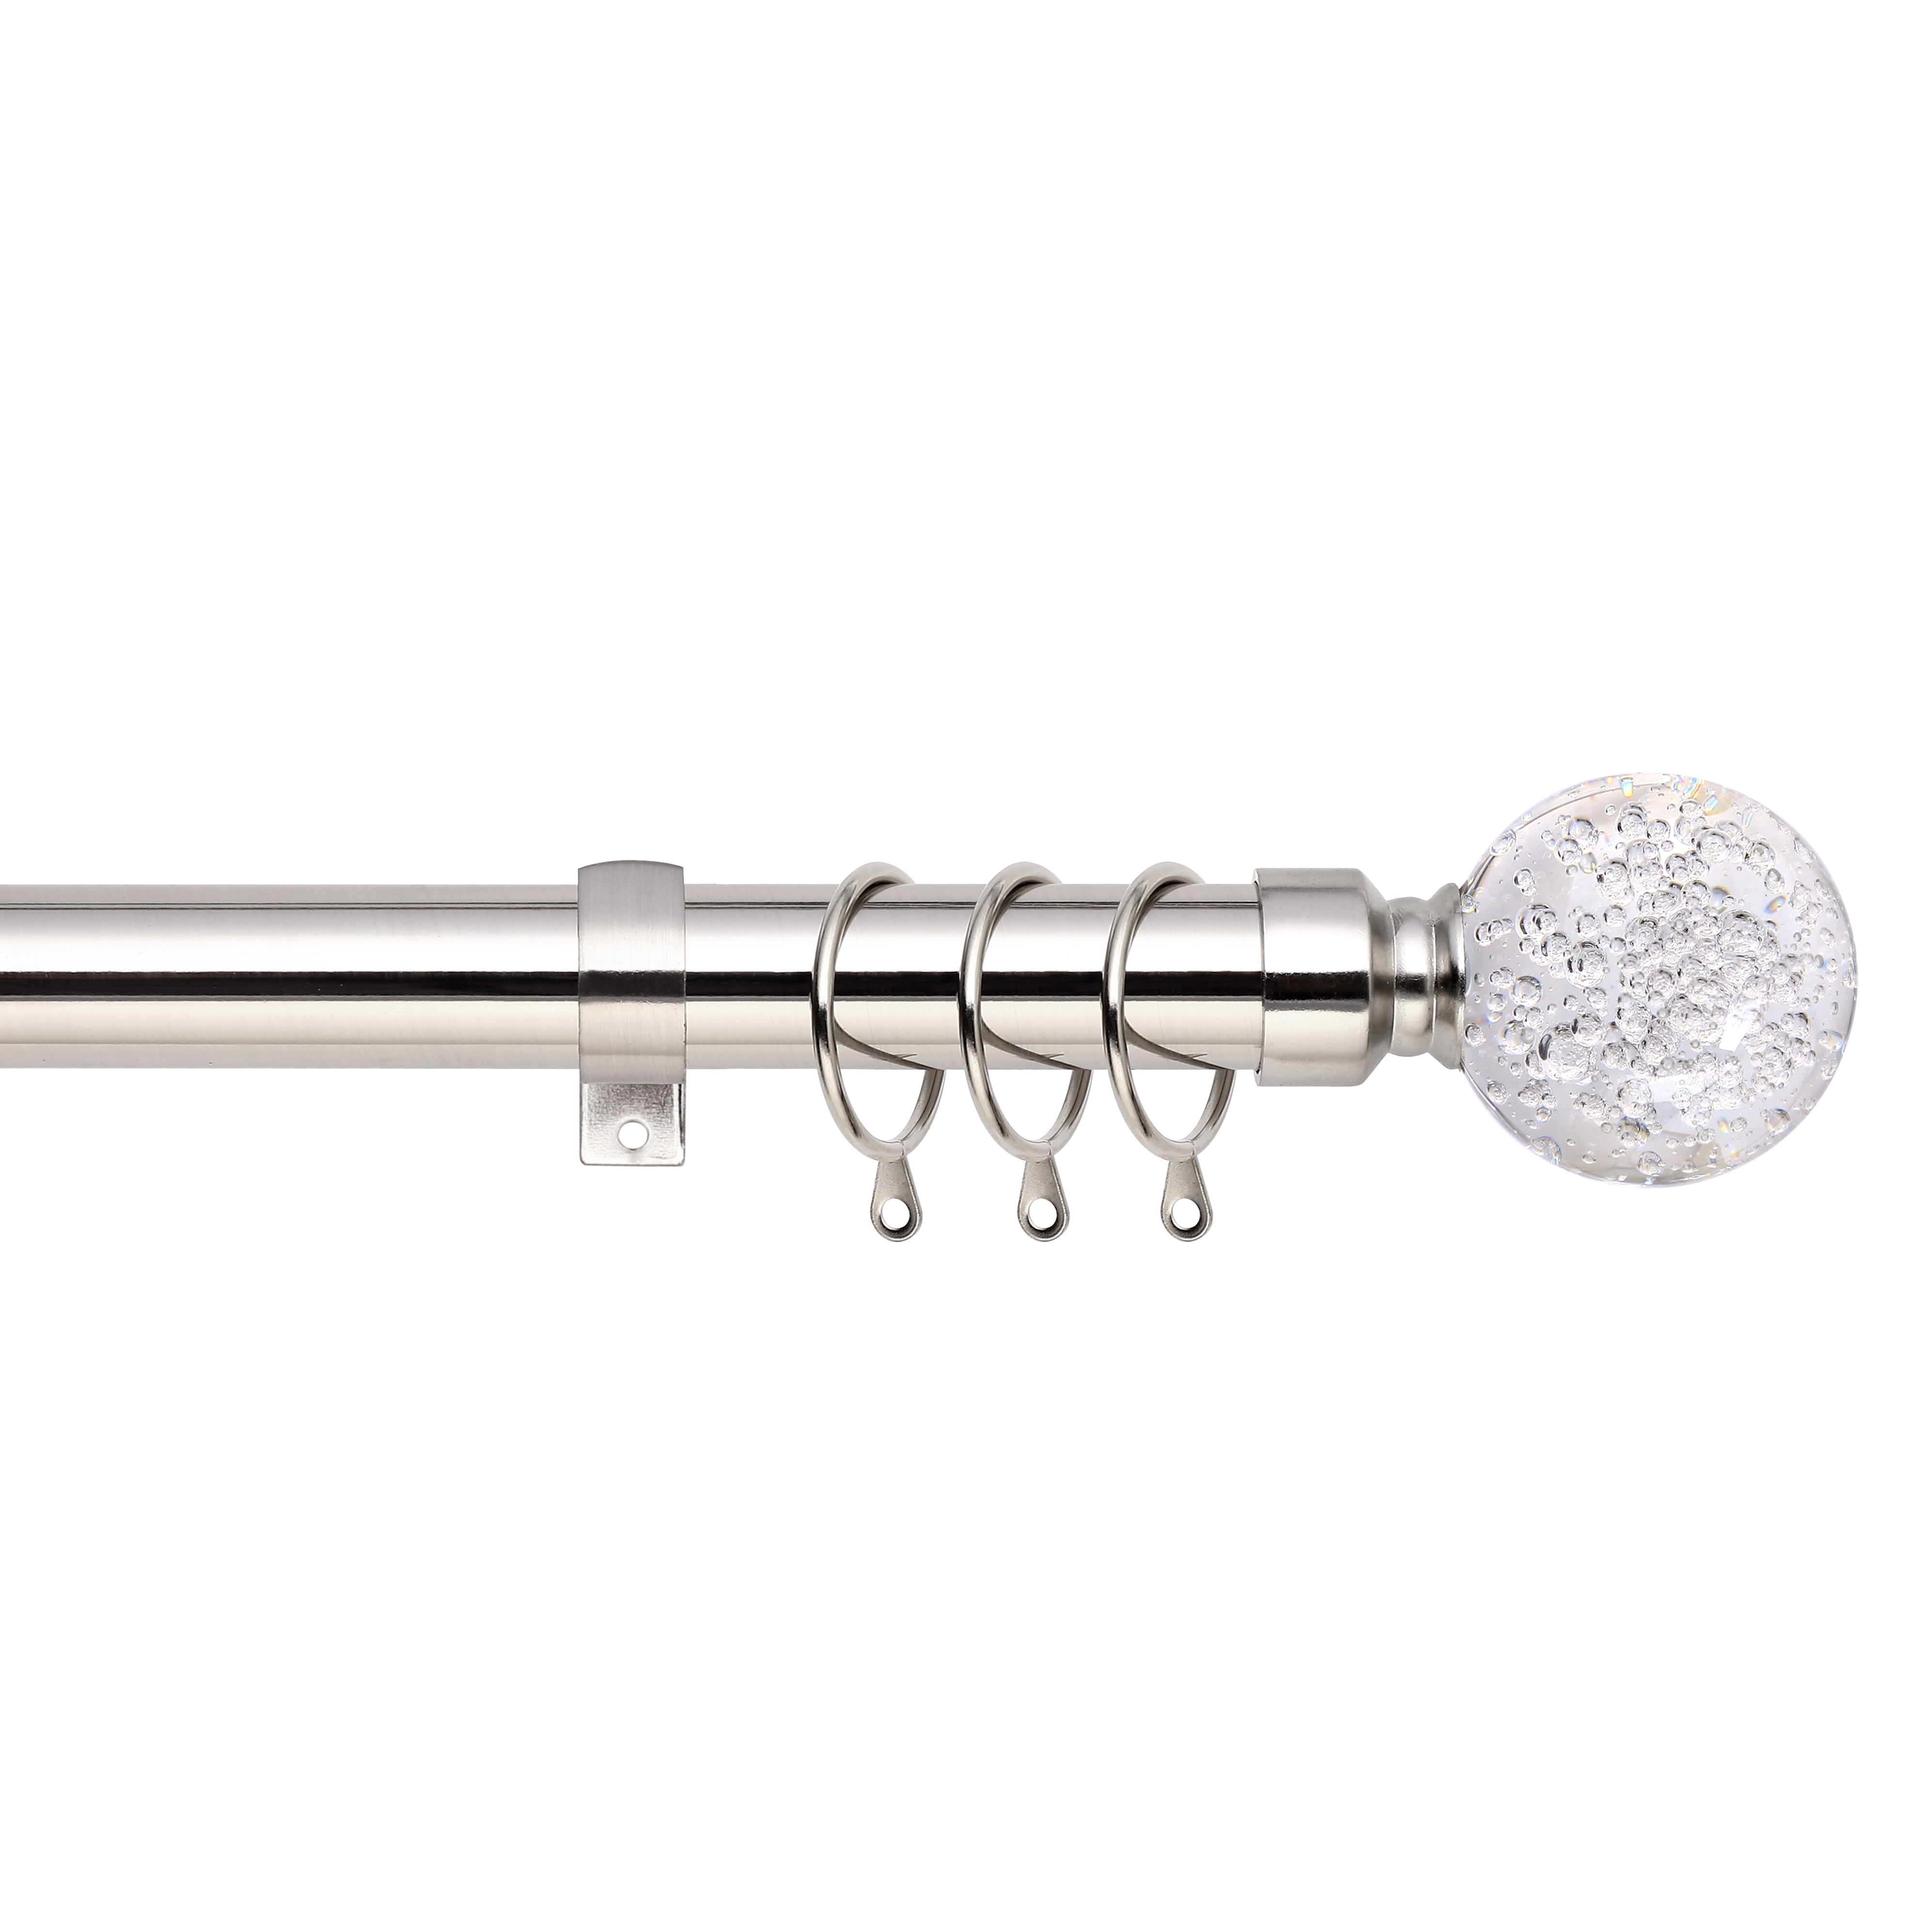 28mm Flat Finials & Fittings Includes Rings Extendable Metal Curtain Pole